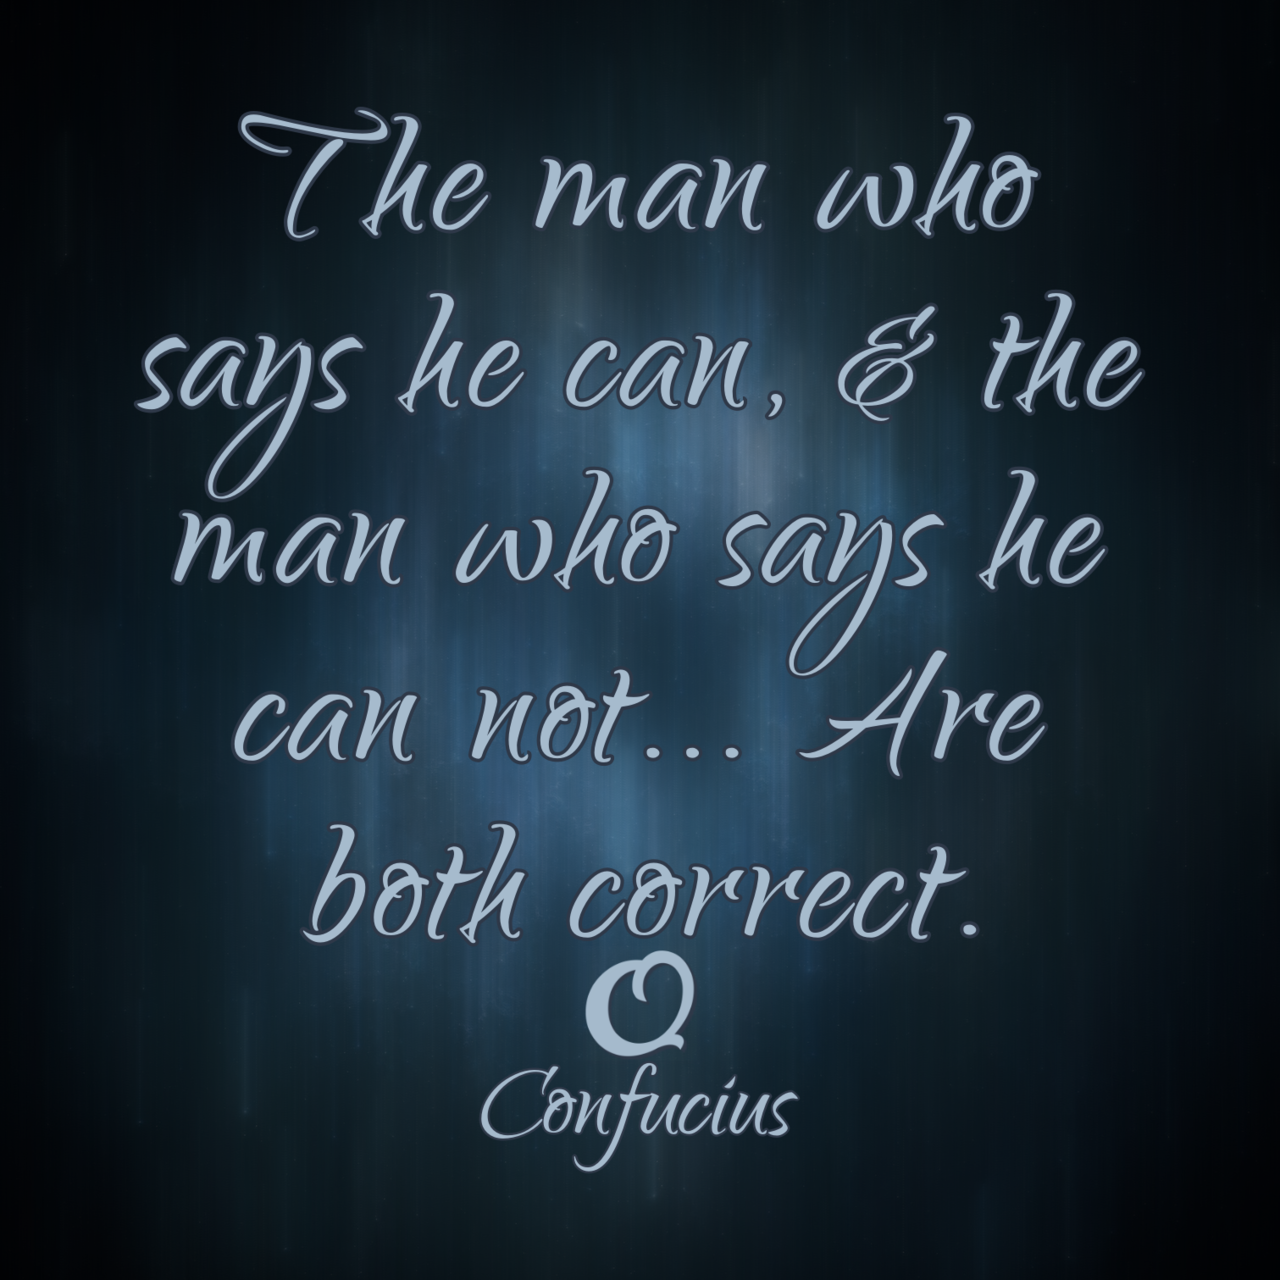 Confucius “The Man who says he can, and the man who says he can not… Are both correct.”